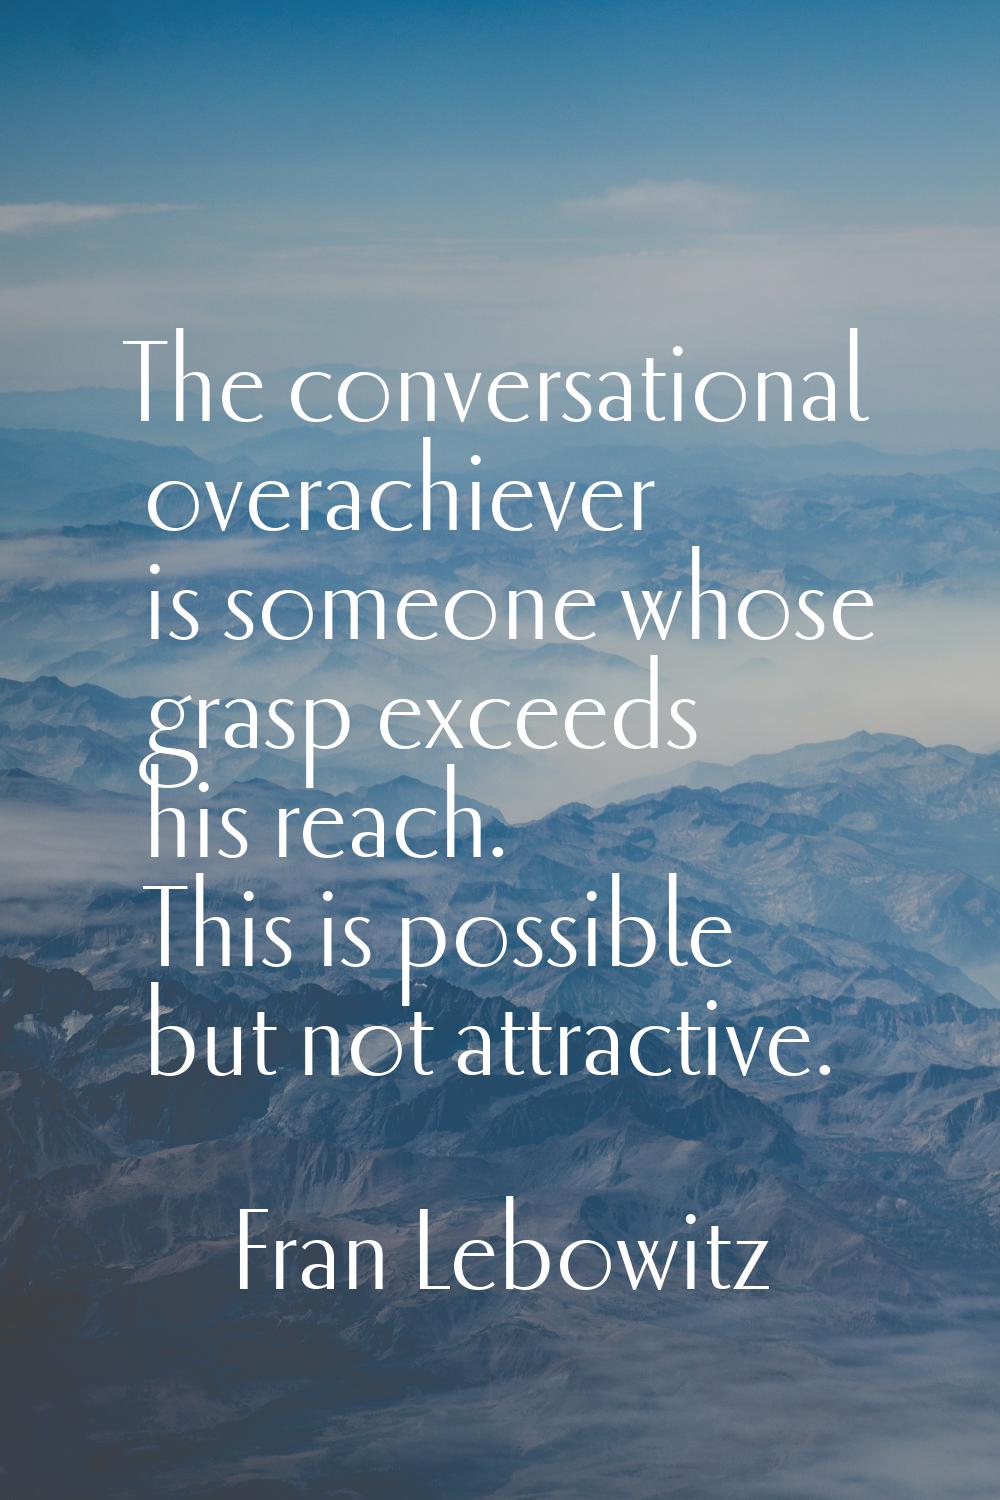 The conversational overachiever is someone whose grasp exceeds his reach. This is possible but not 